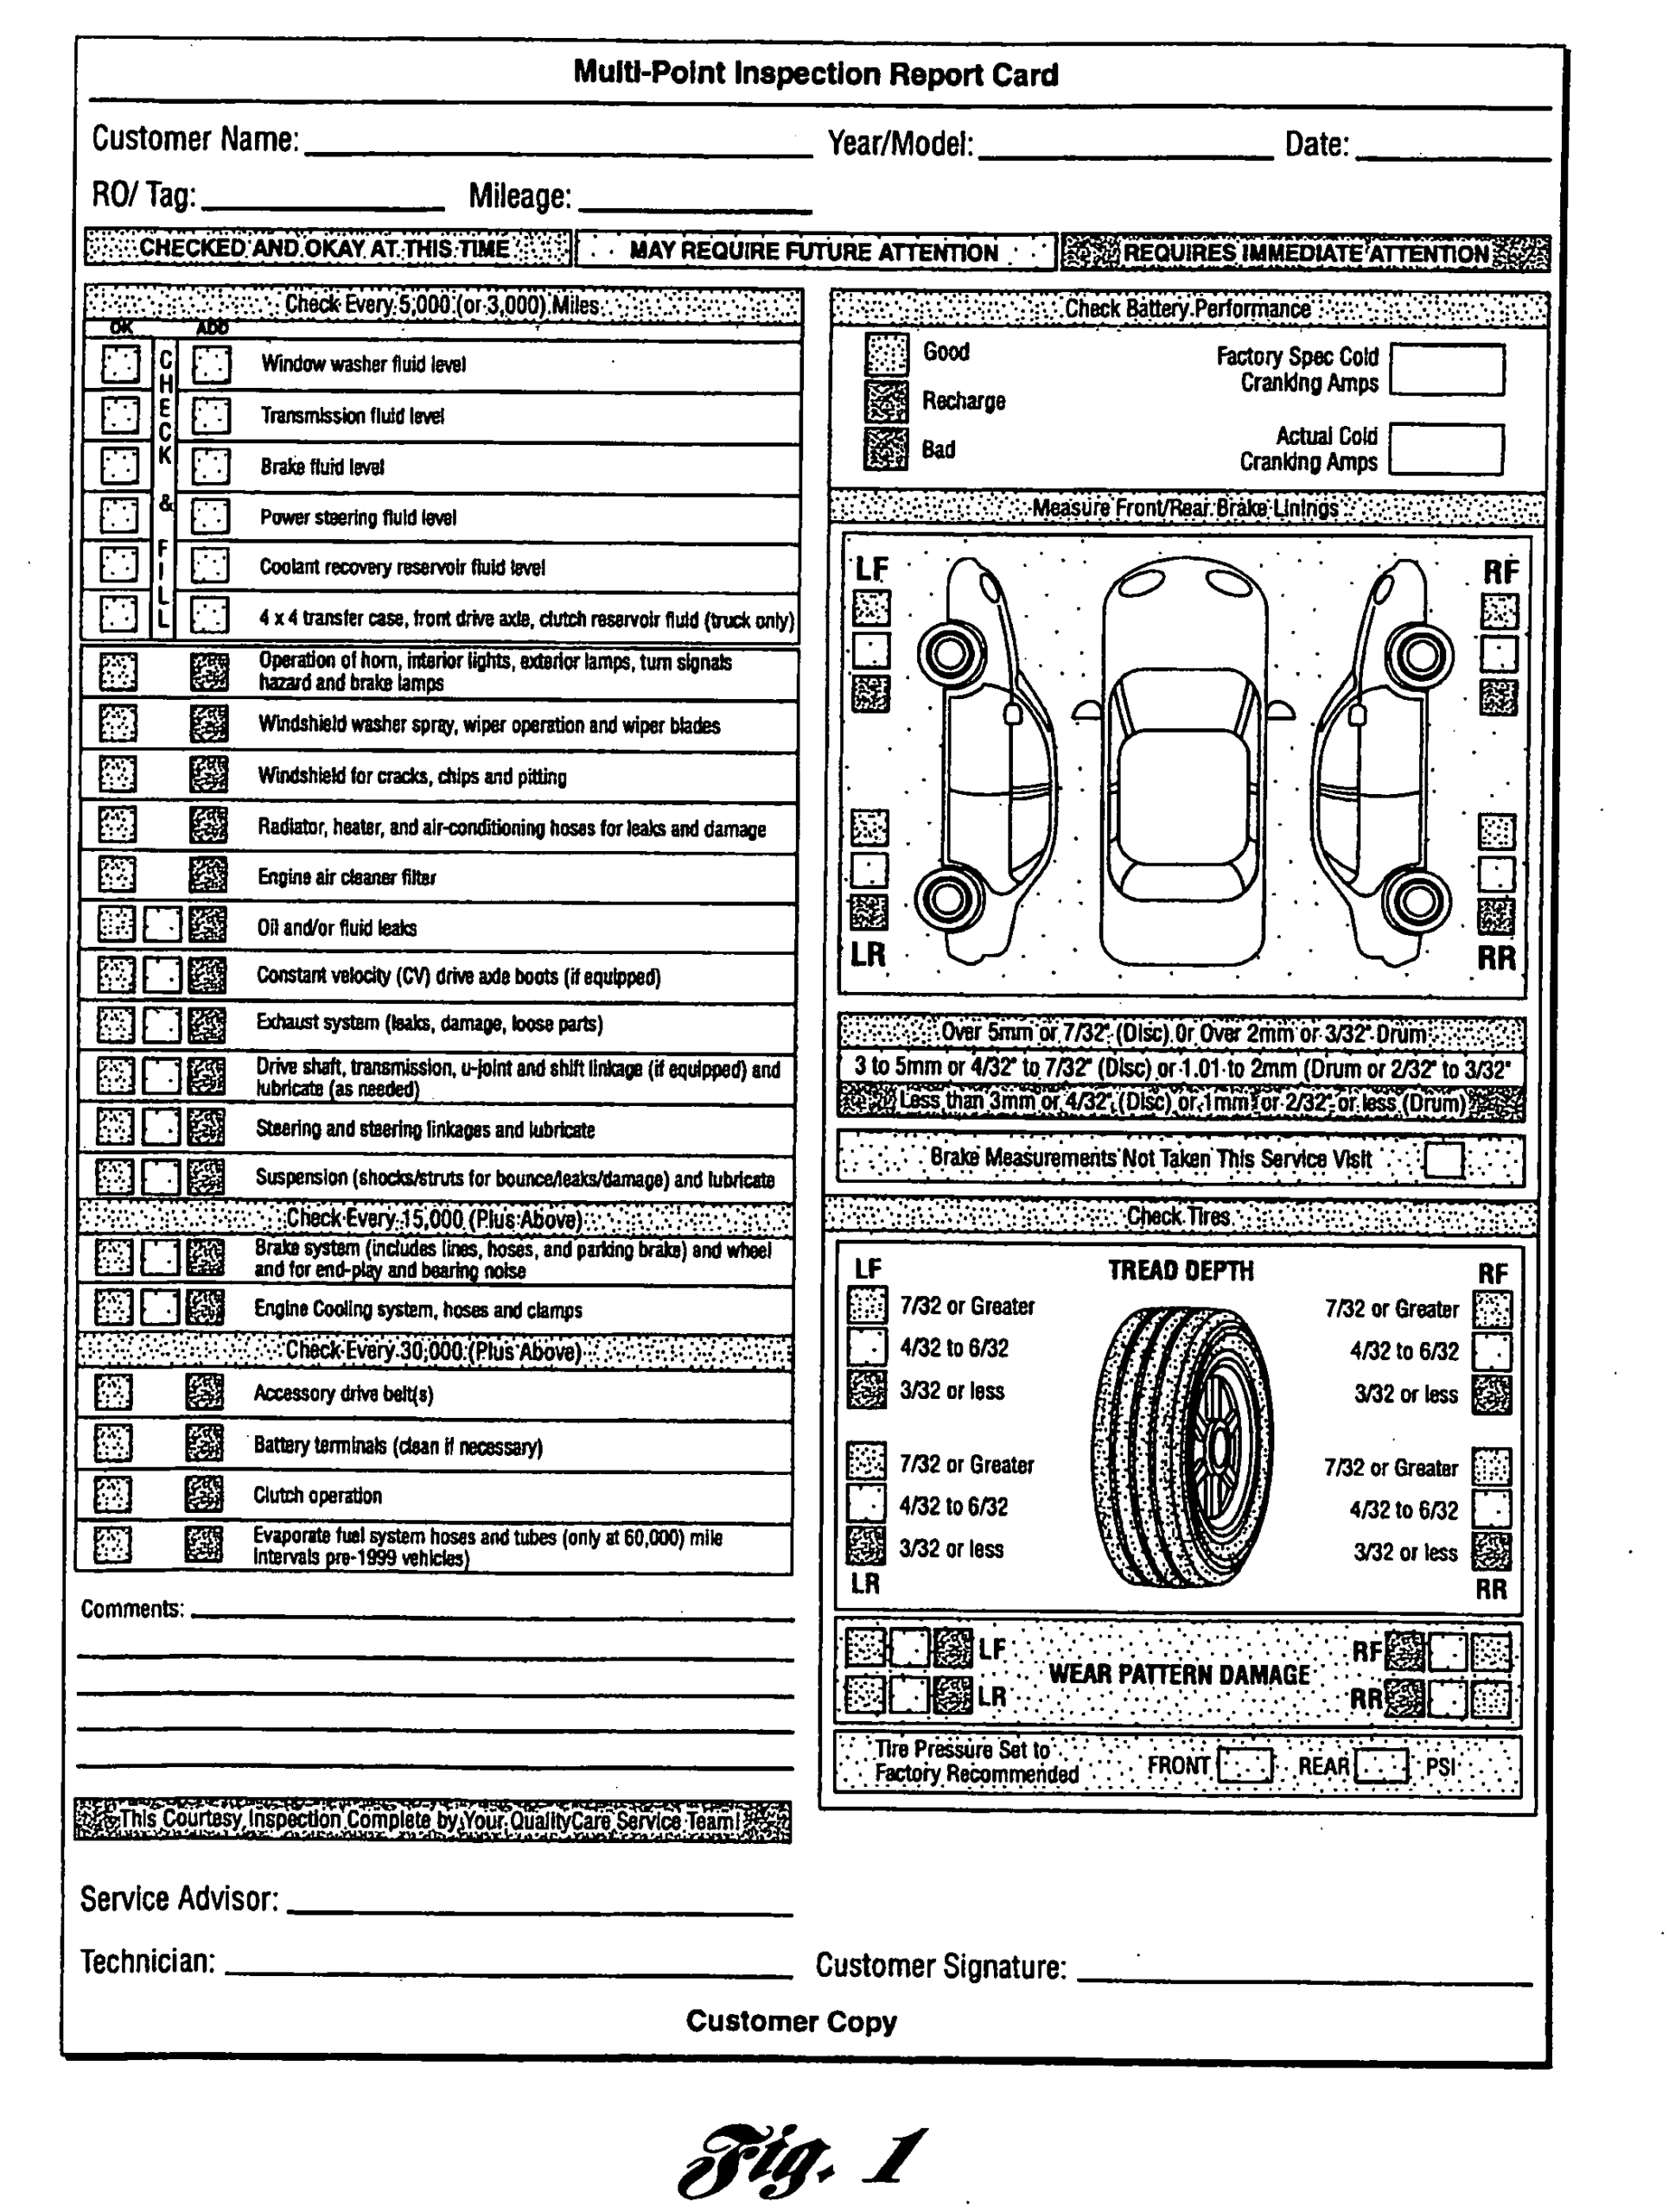 Multi Point Inspection Report Card As Recommendedford For Vehicle Inspection Report Template